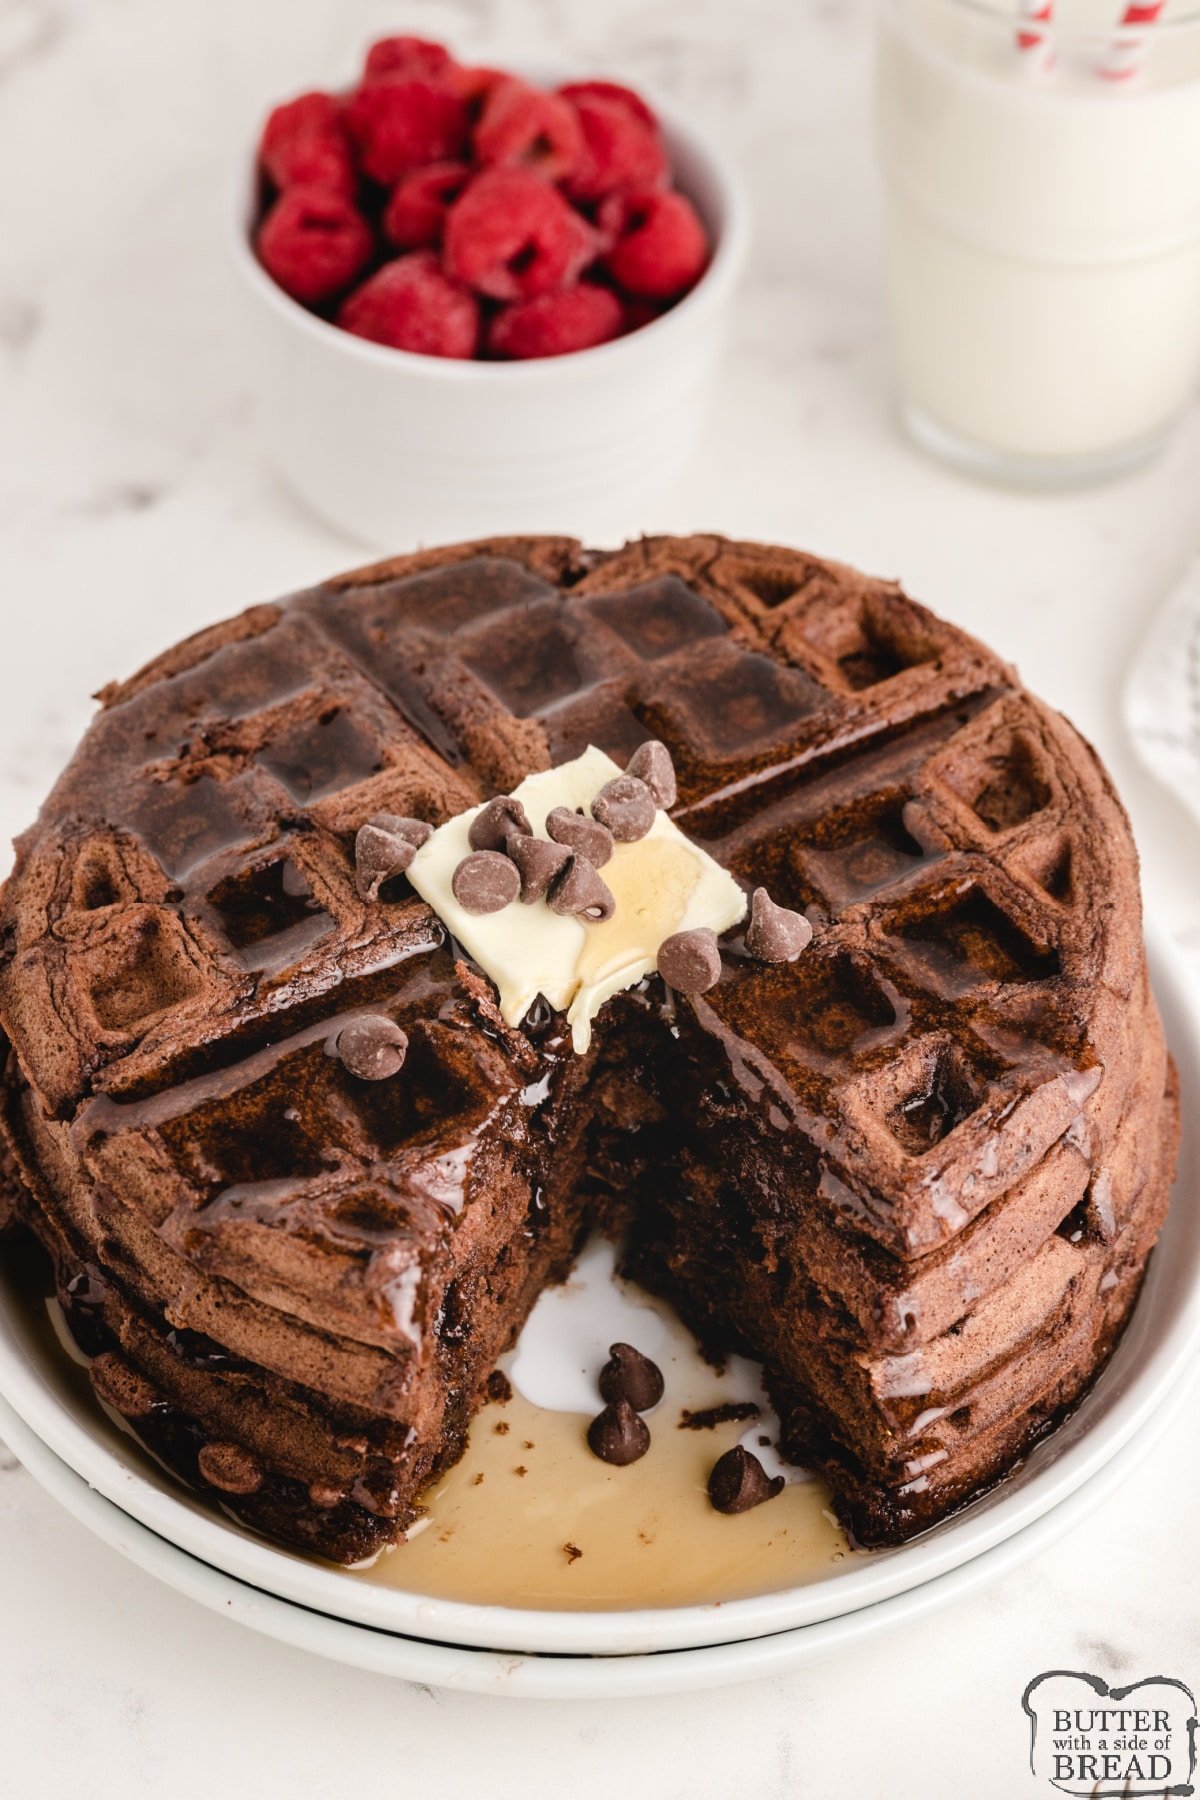 Waffles made from scratch with cocoa powder and chocolate chips